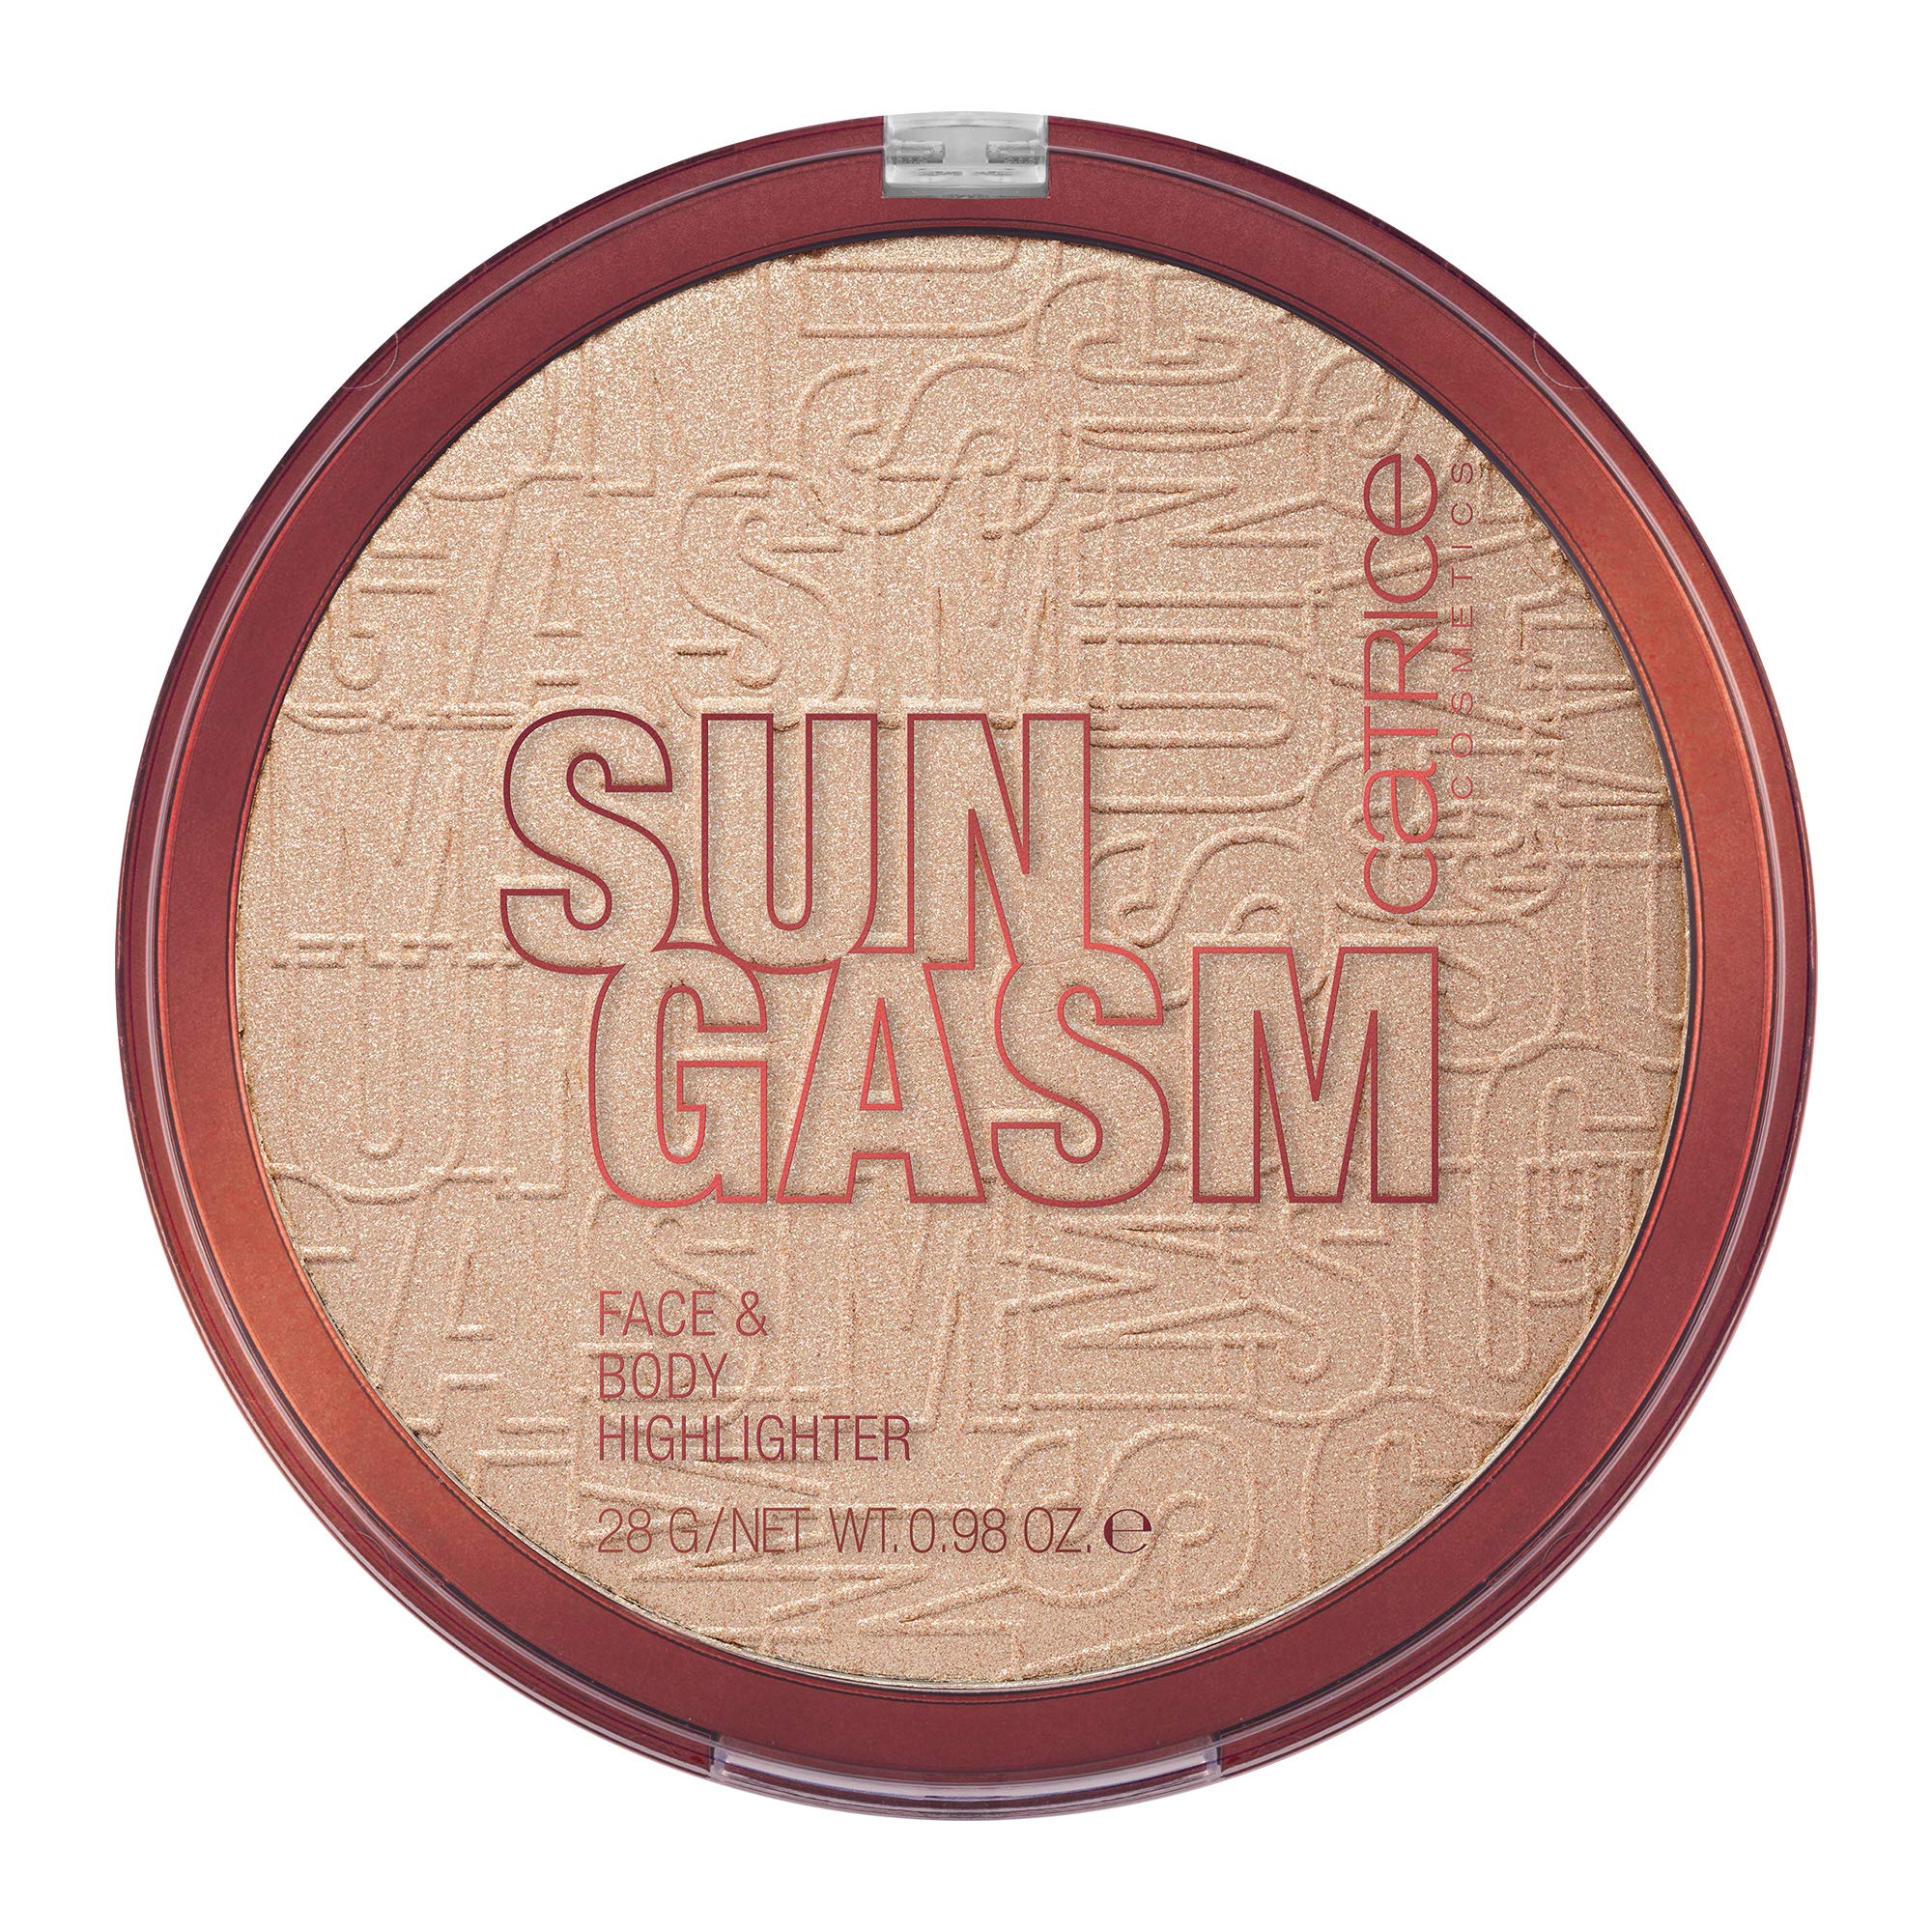 Catrice | SUNGASM Face & With Body Soft Highlighter Silky | Sized, Light Powder Jumbo Reflecting